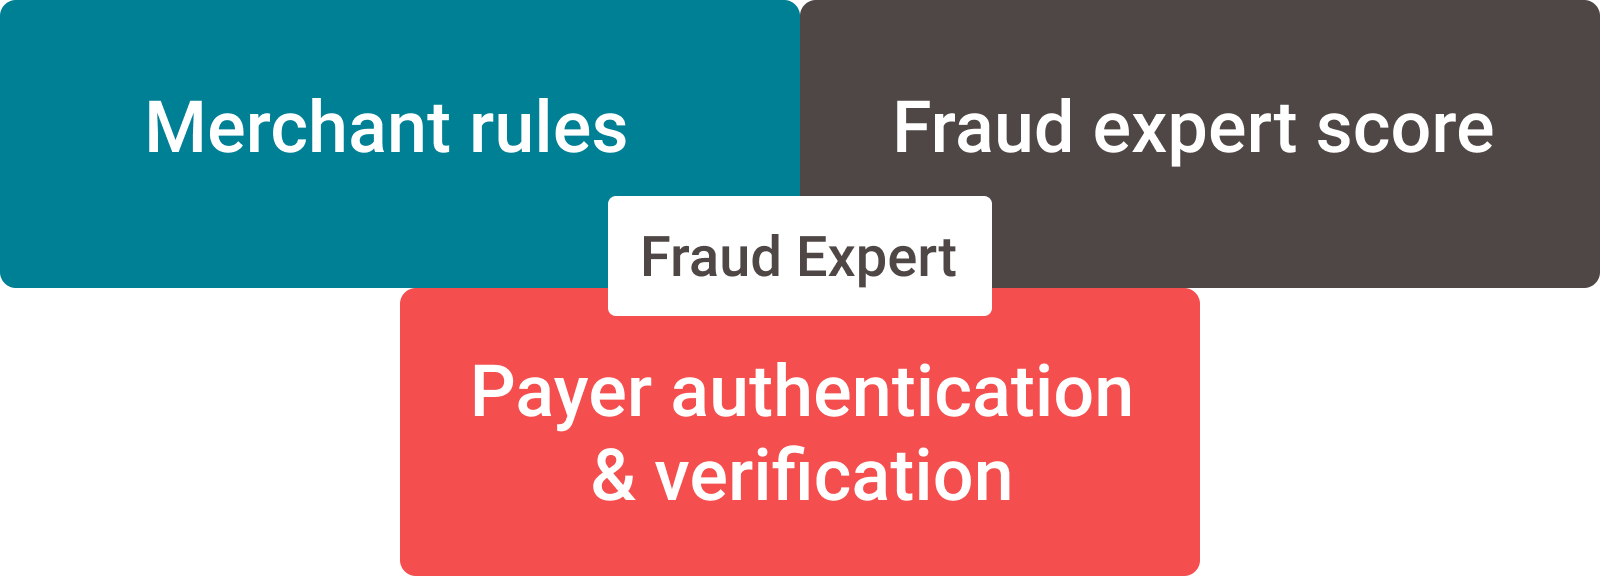 The image above shows a graphical representation of how the three components merchant rules/Fraud Expert Checklist/Payer authentication and verification are combined to the Fraud Expert Checklist.